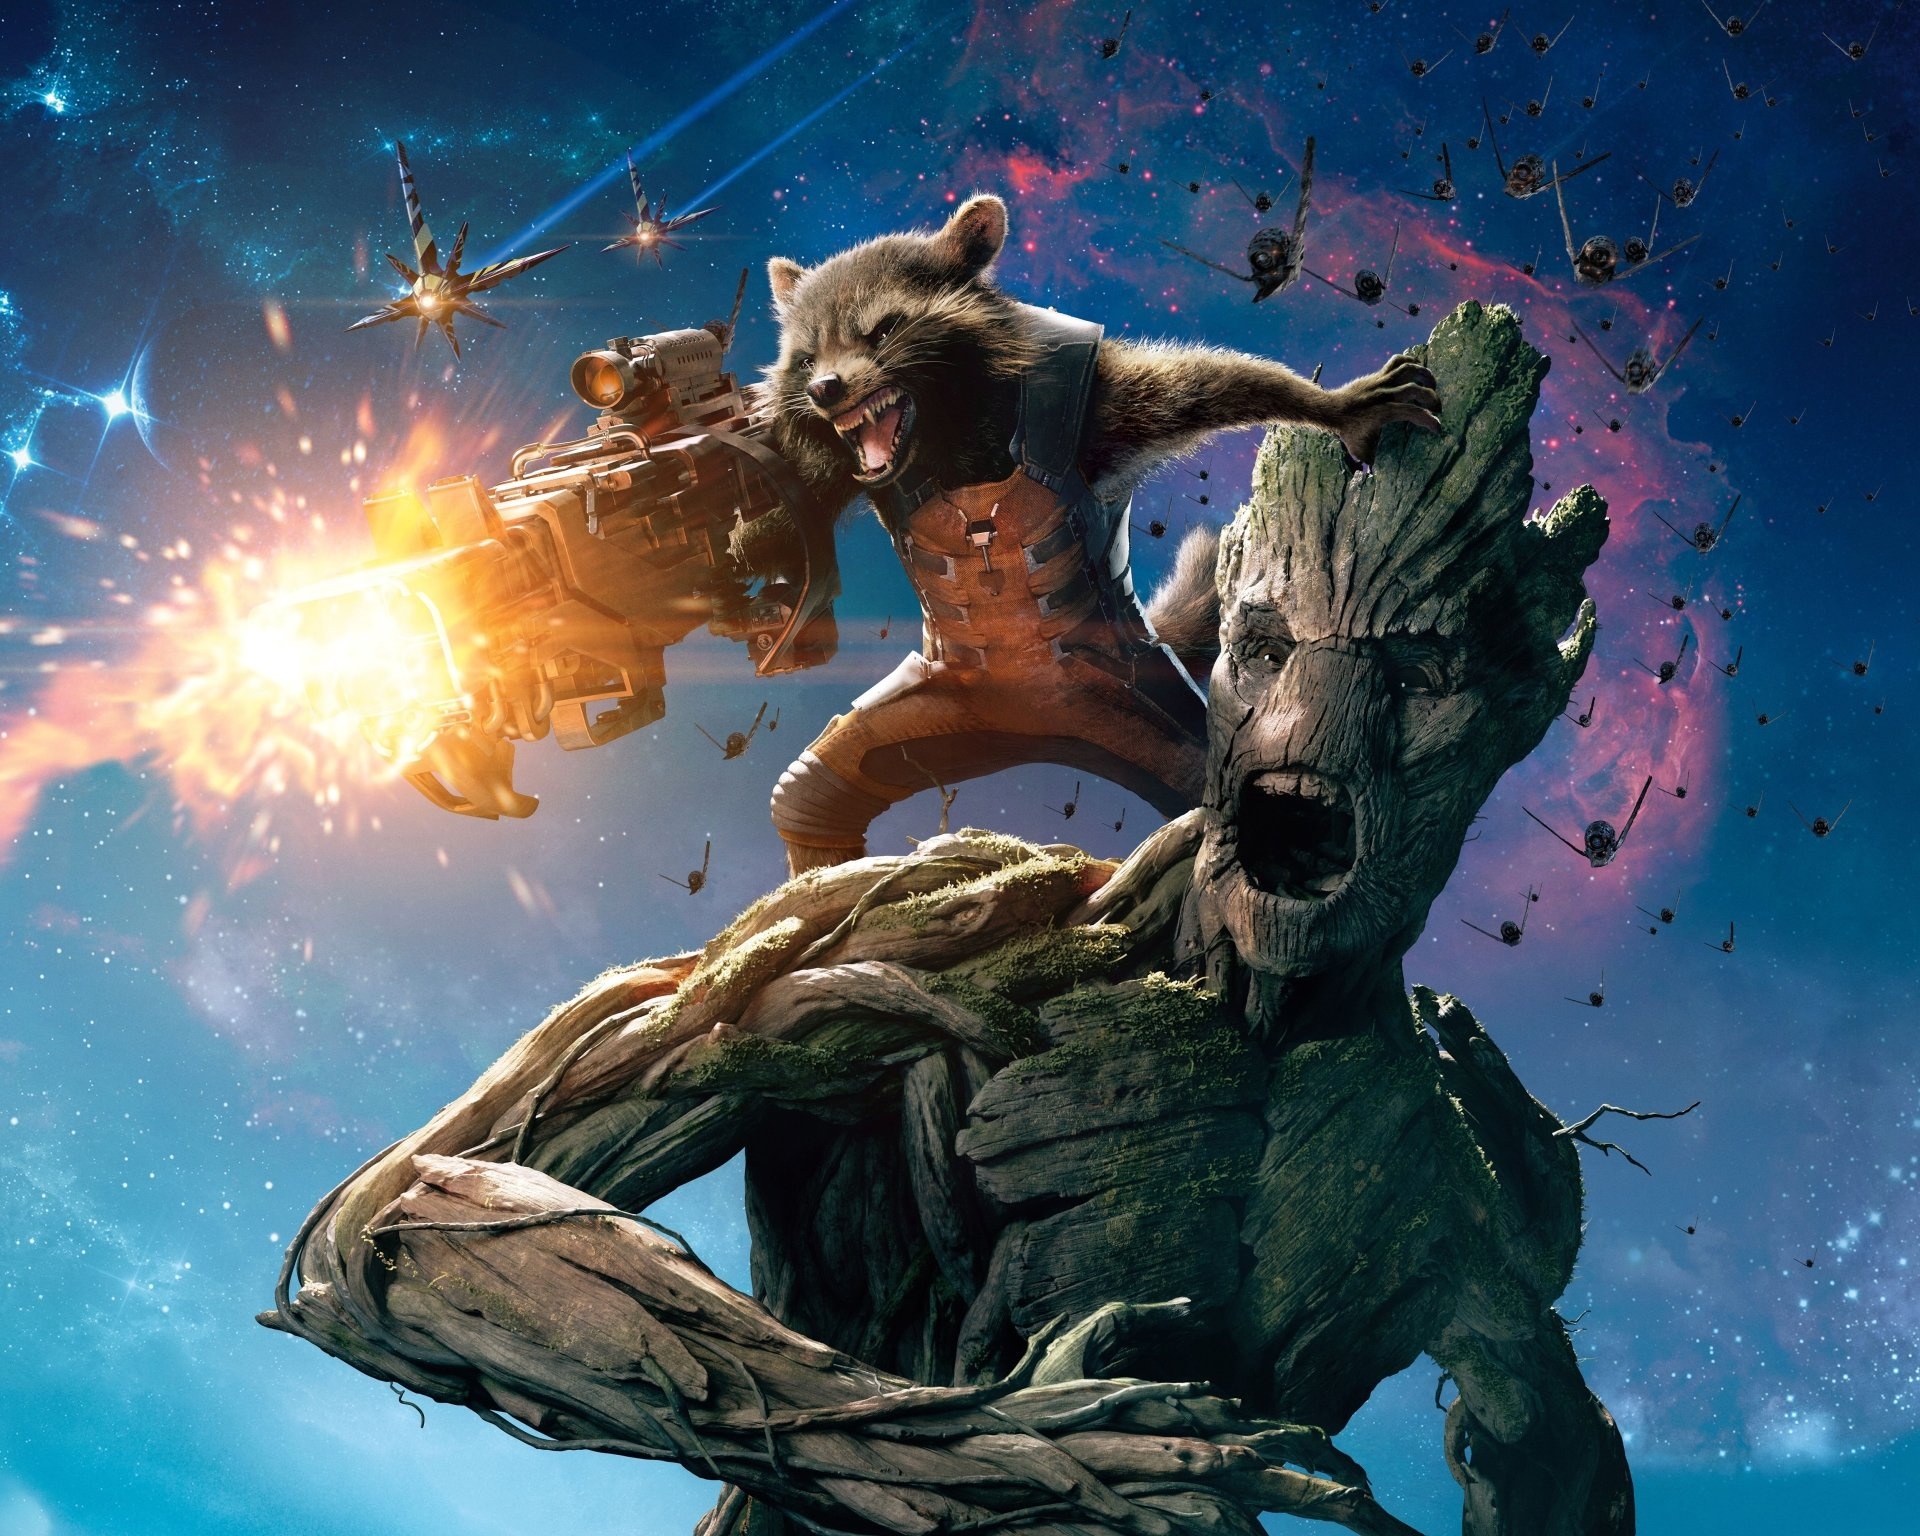 Guardians of the Galaxy HD wallpapers, Futuristic designs, Epic backgrounds, Marvel superheroes, 1920x1540 HD Desktop